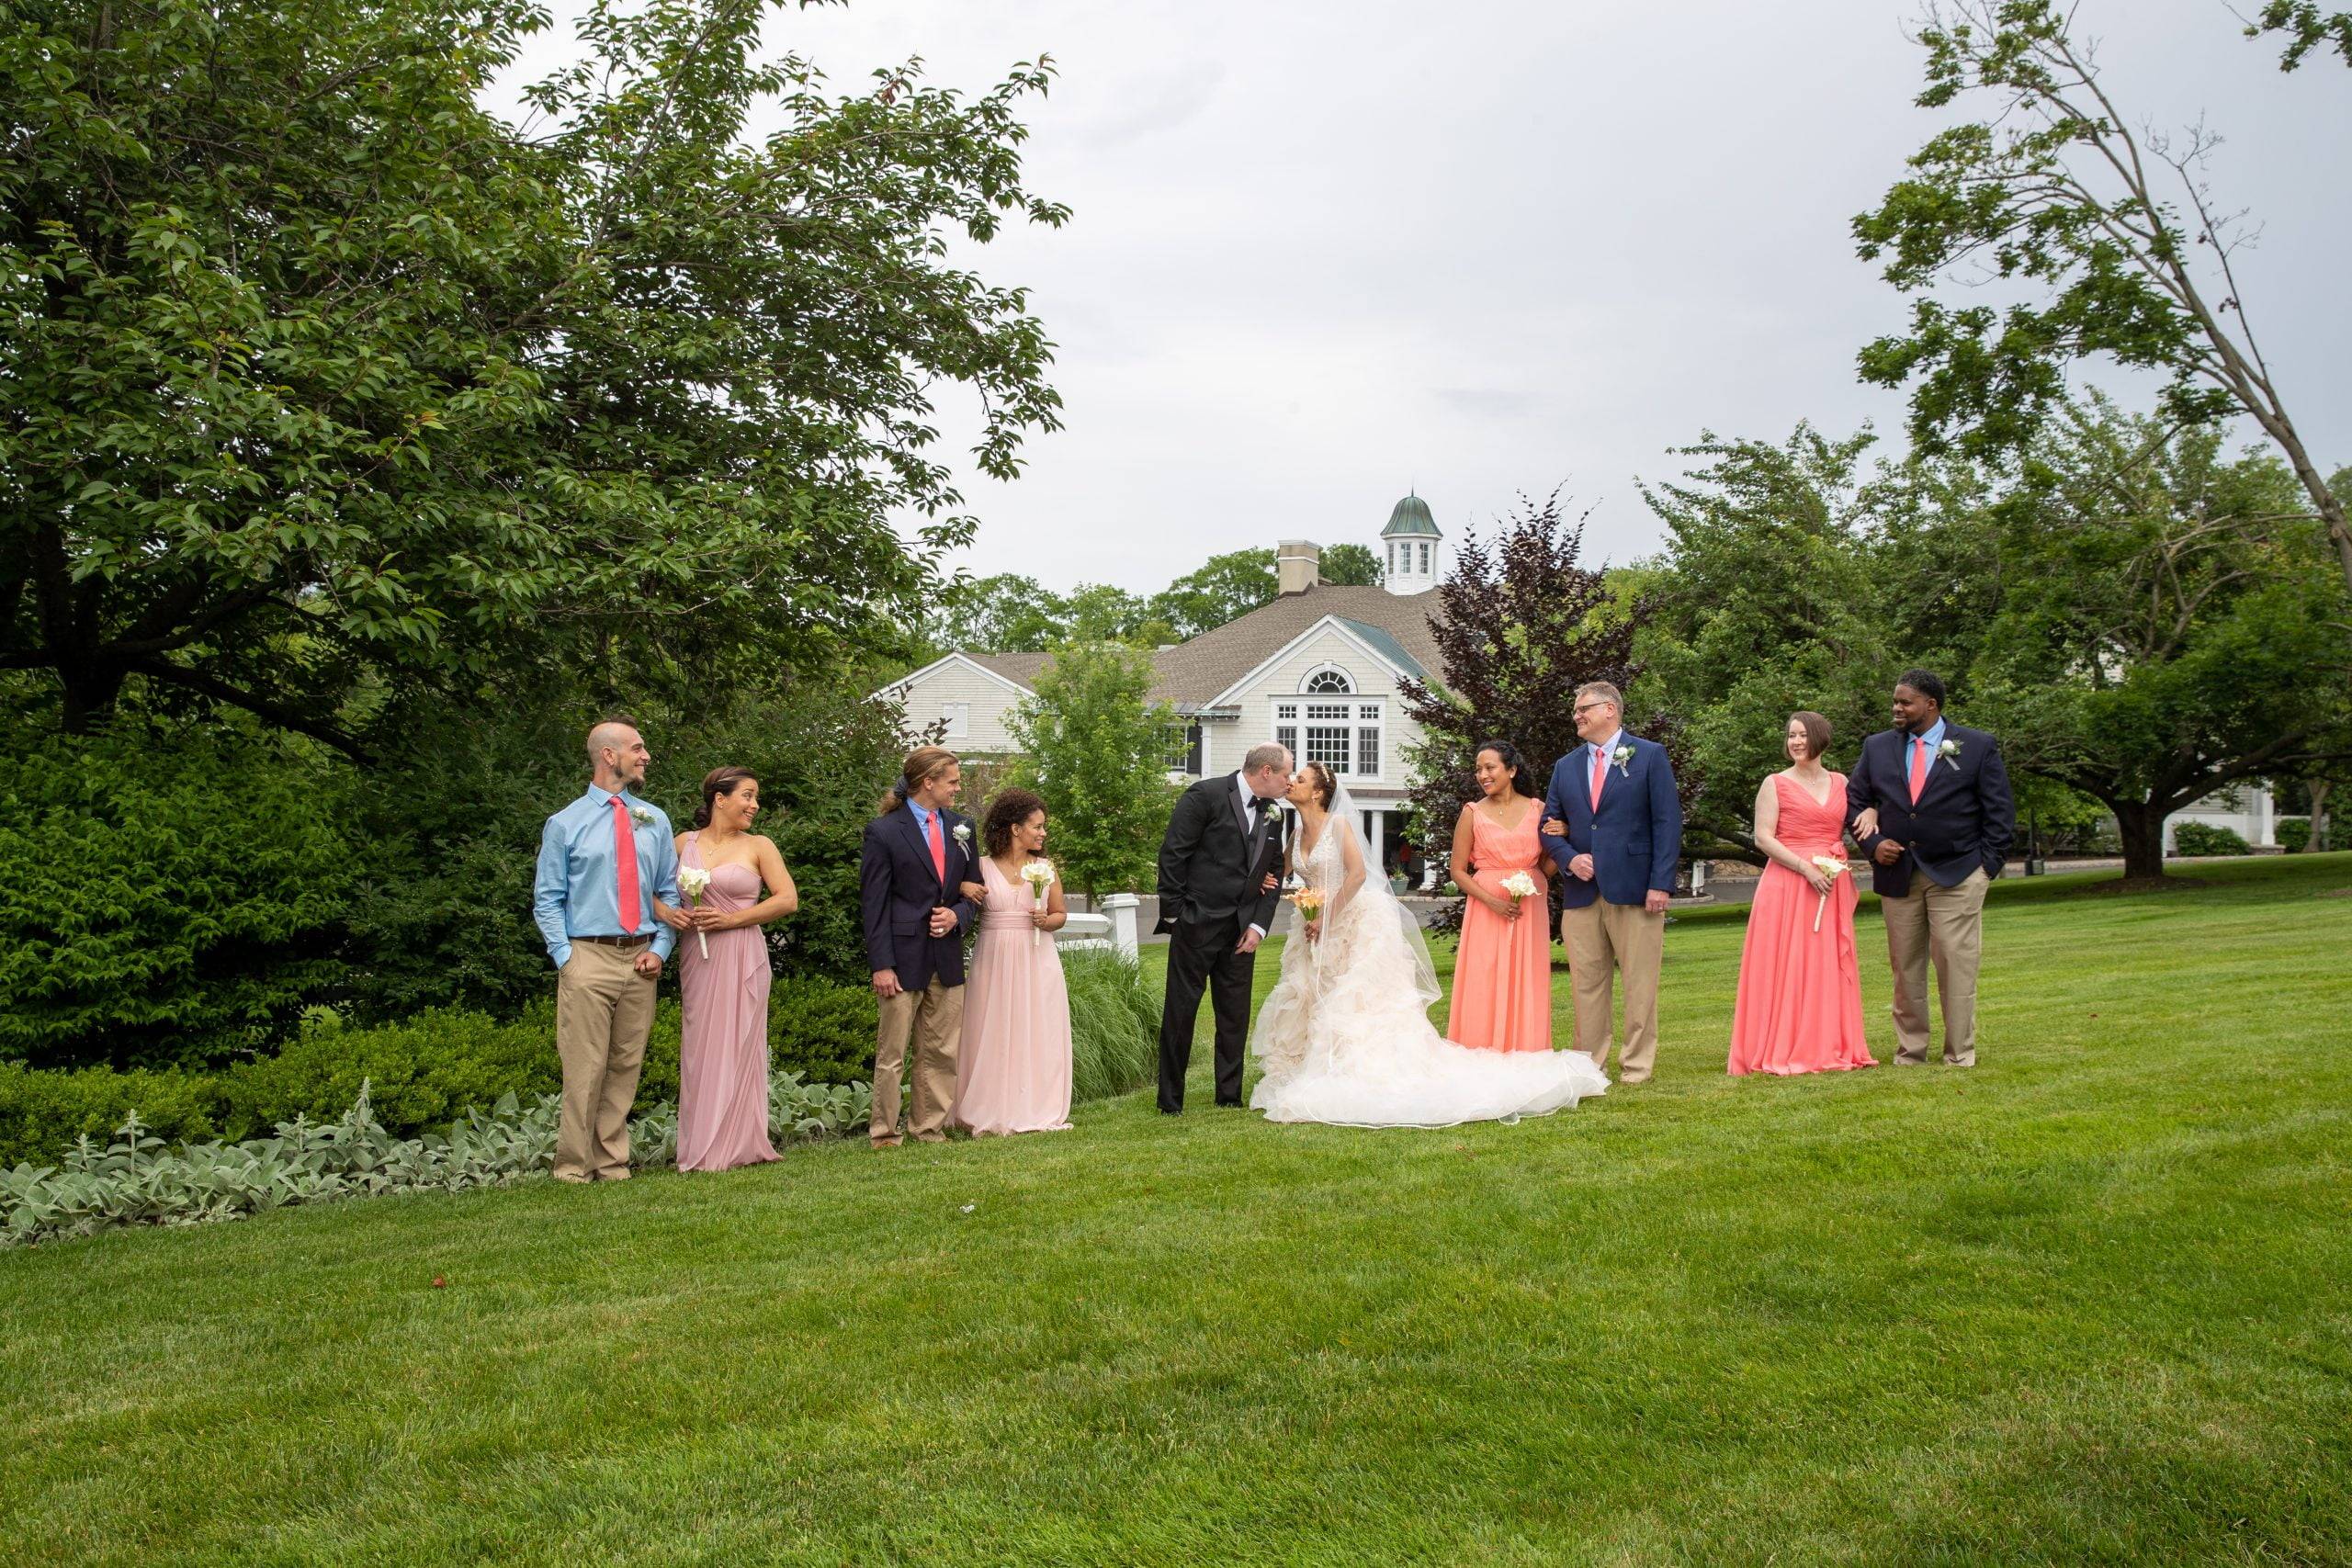 Olde Mill Inn bridal party on the grass